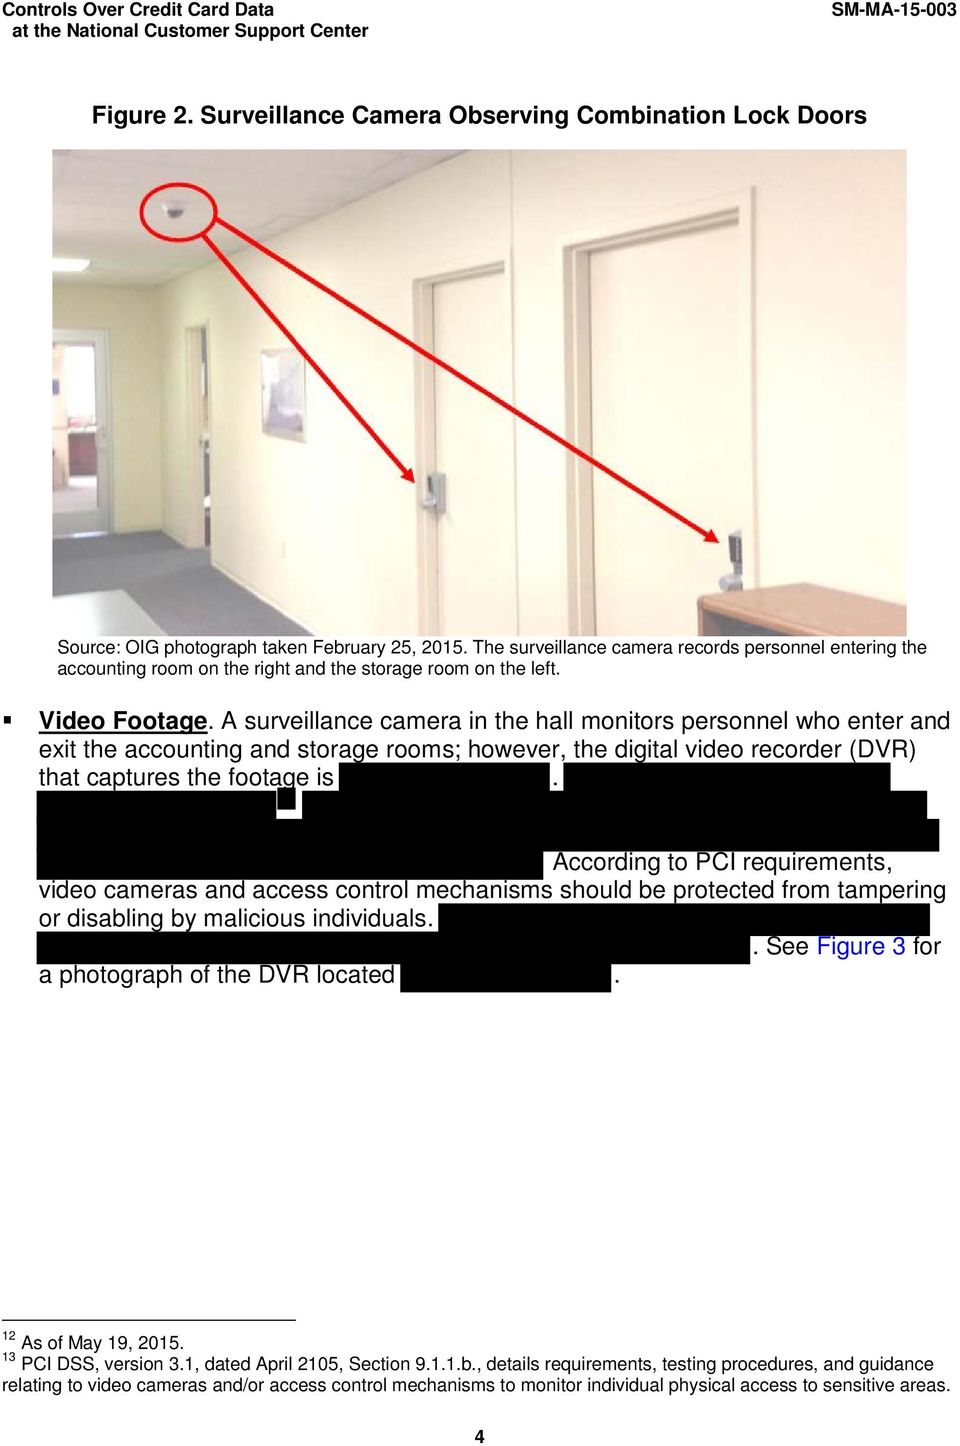 A surveillance camera in the hall monitors personnel who enter and exit the accounting and storage rooms; however, the digital video recorder (DVR) that captures the footage is.